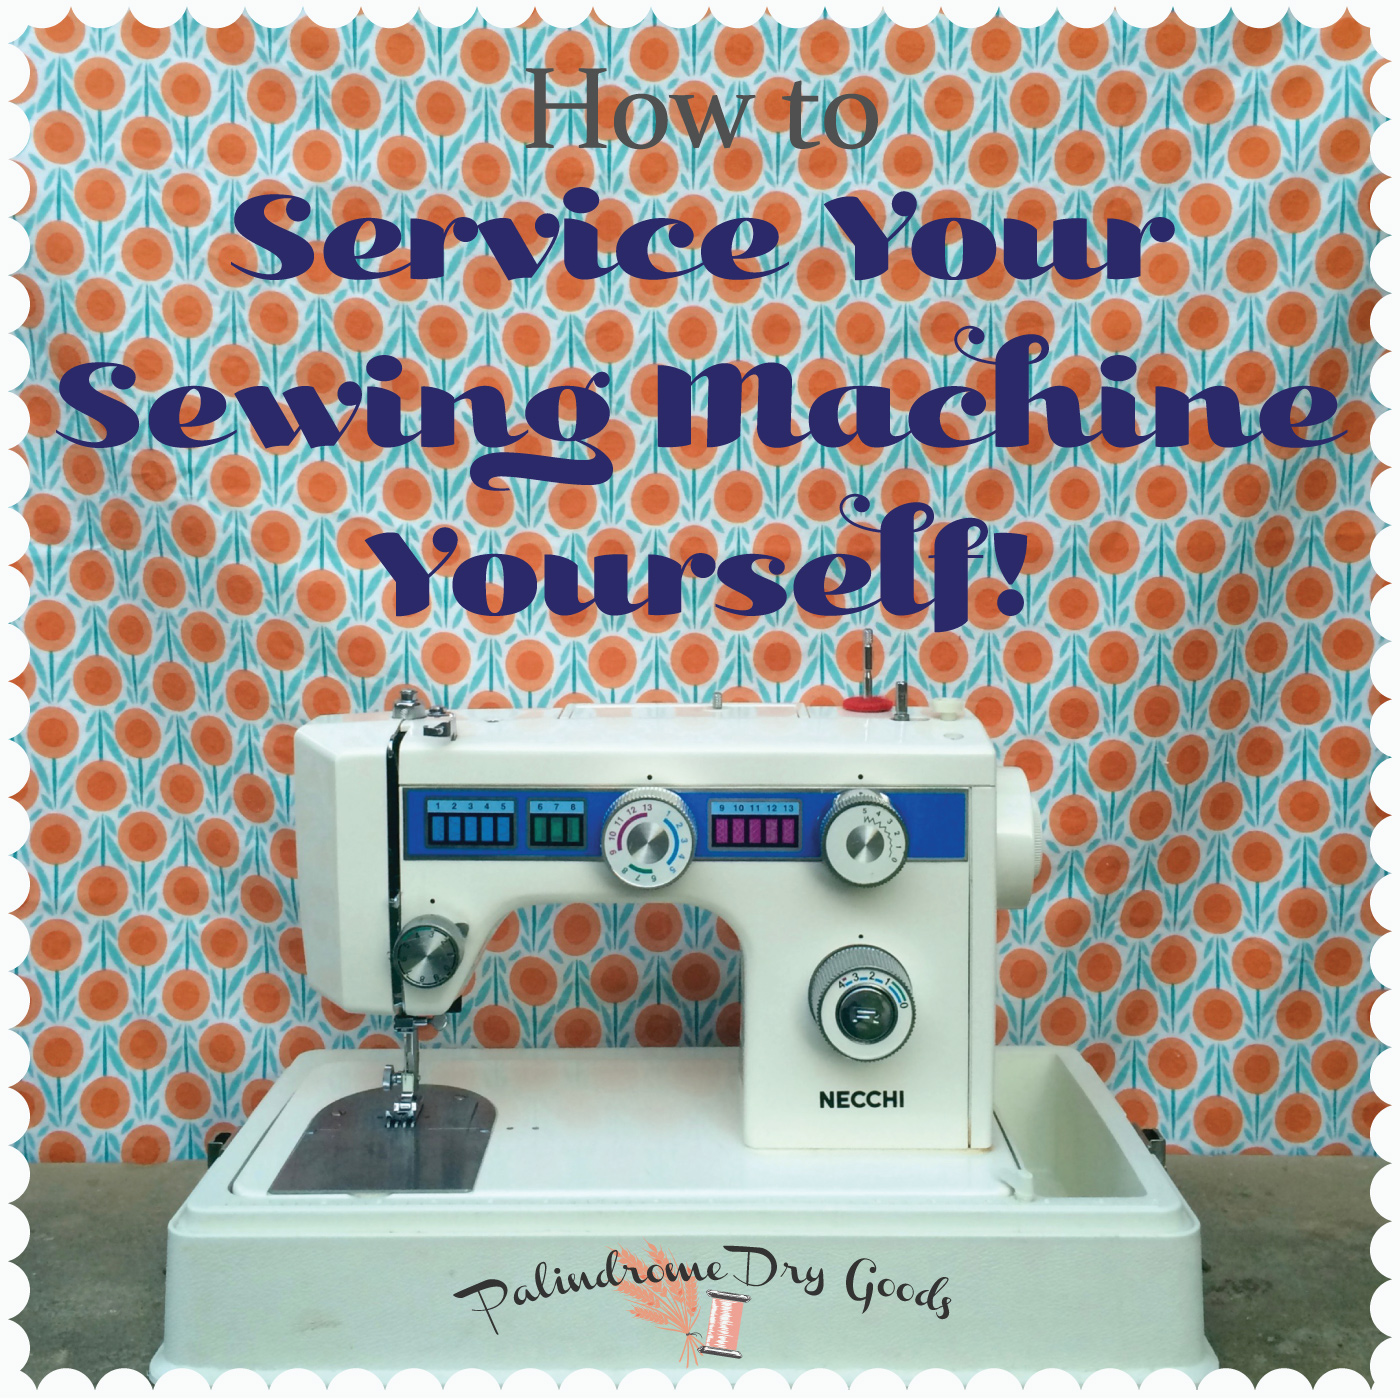 Machine Sewing for Beginners - Student Involvement